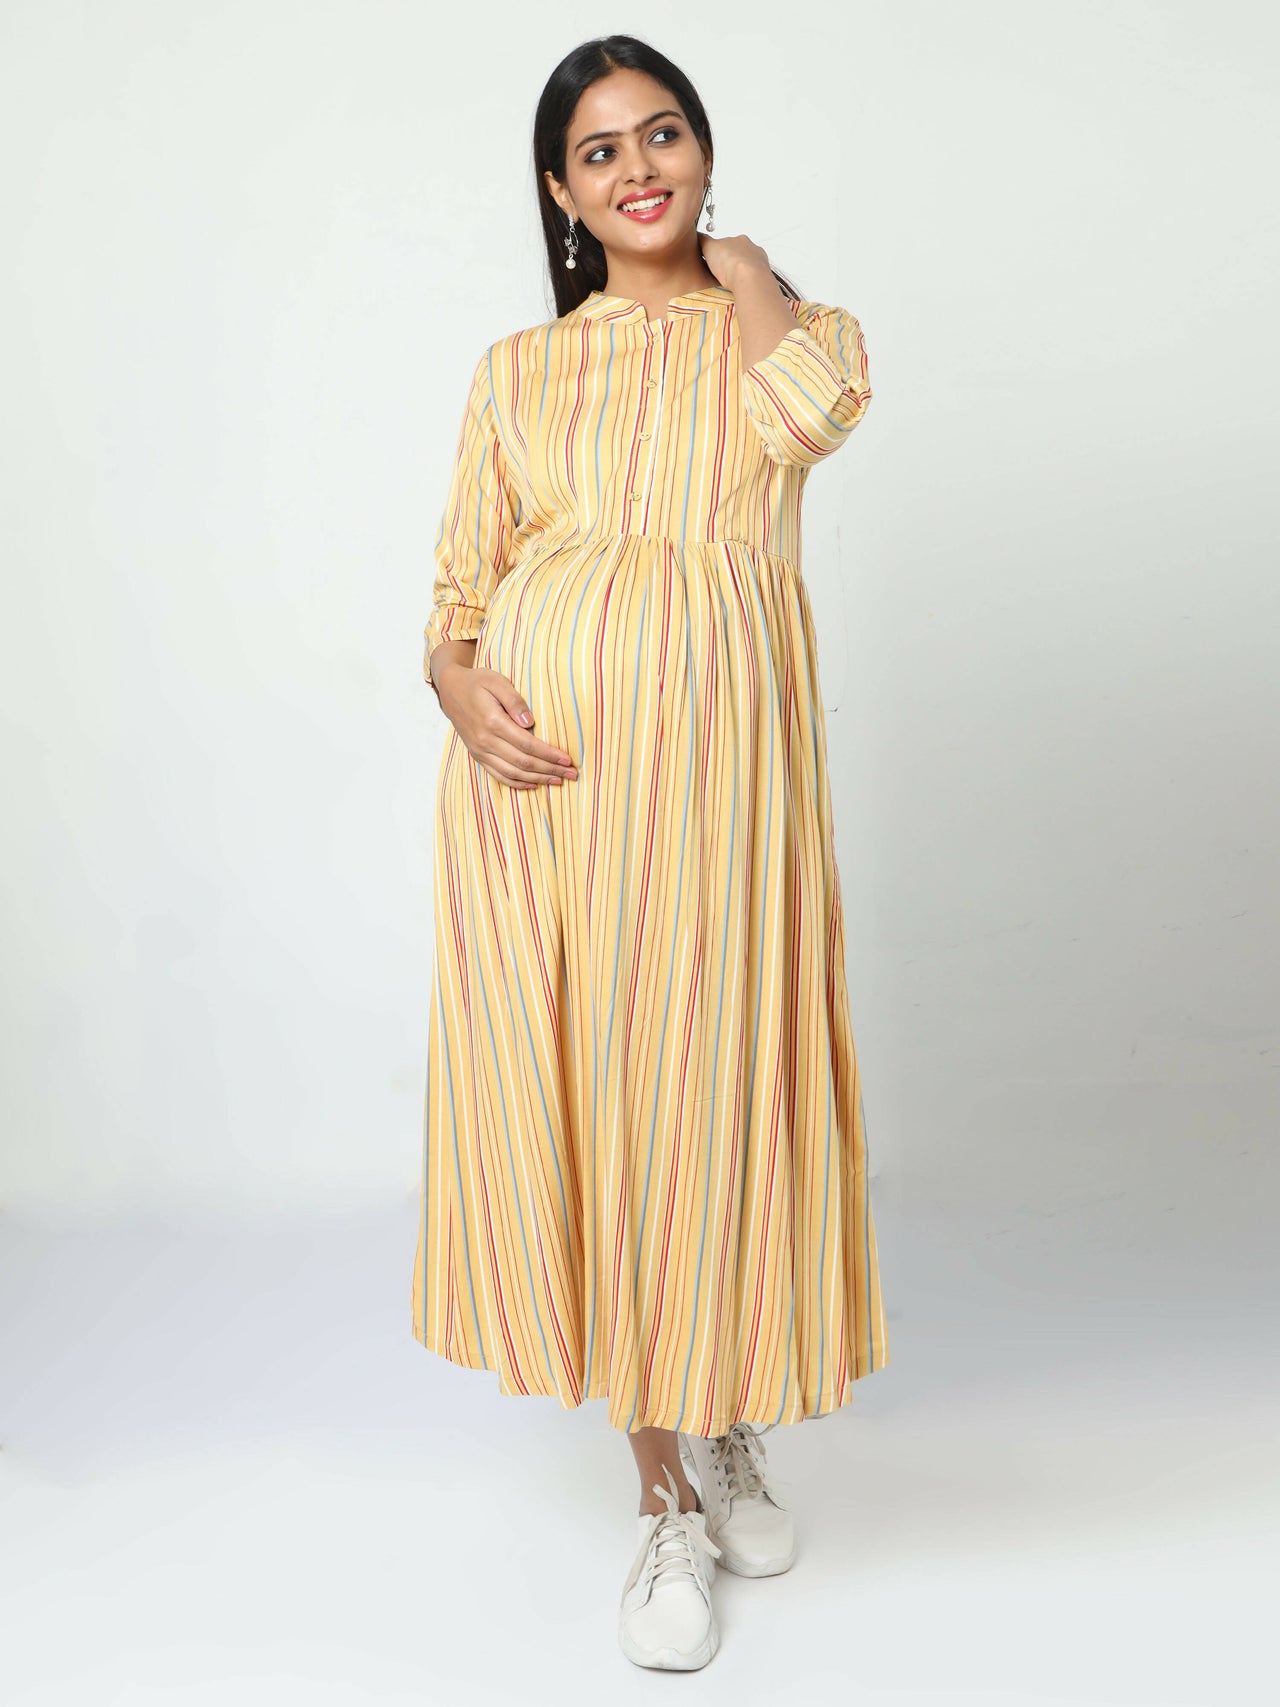 Manet Three Fourth Maternity Dress Striped With Concealed Zipper Nursing Access - Yellow - Distacart